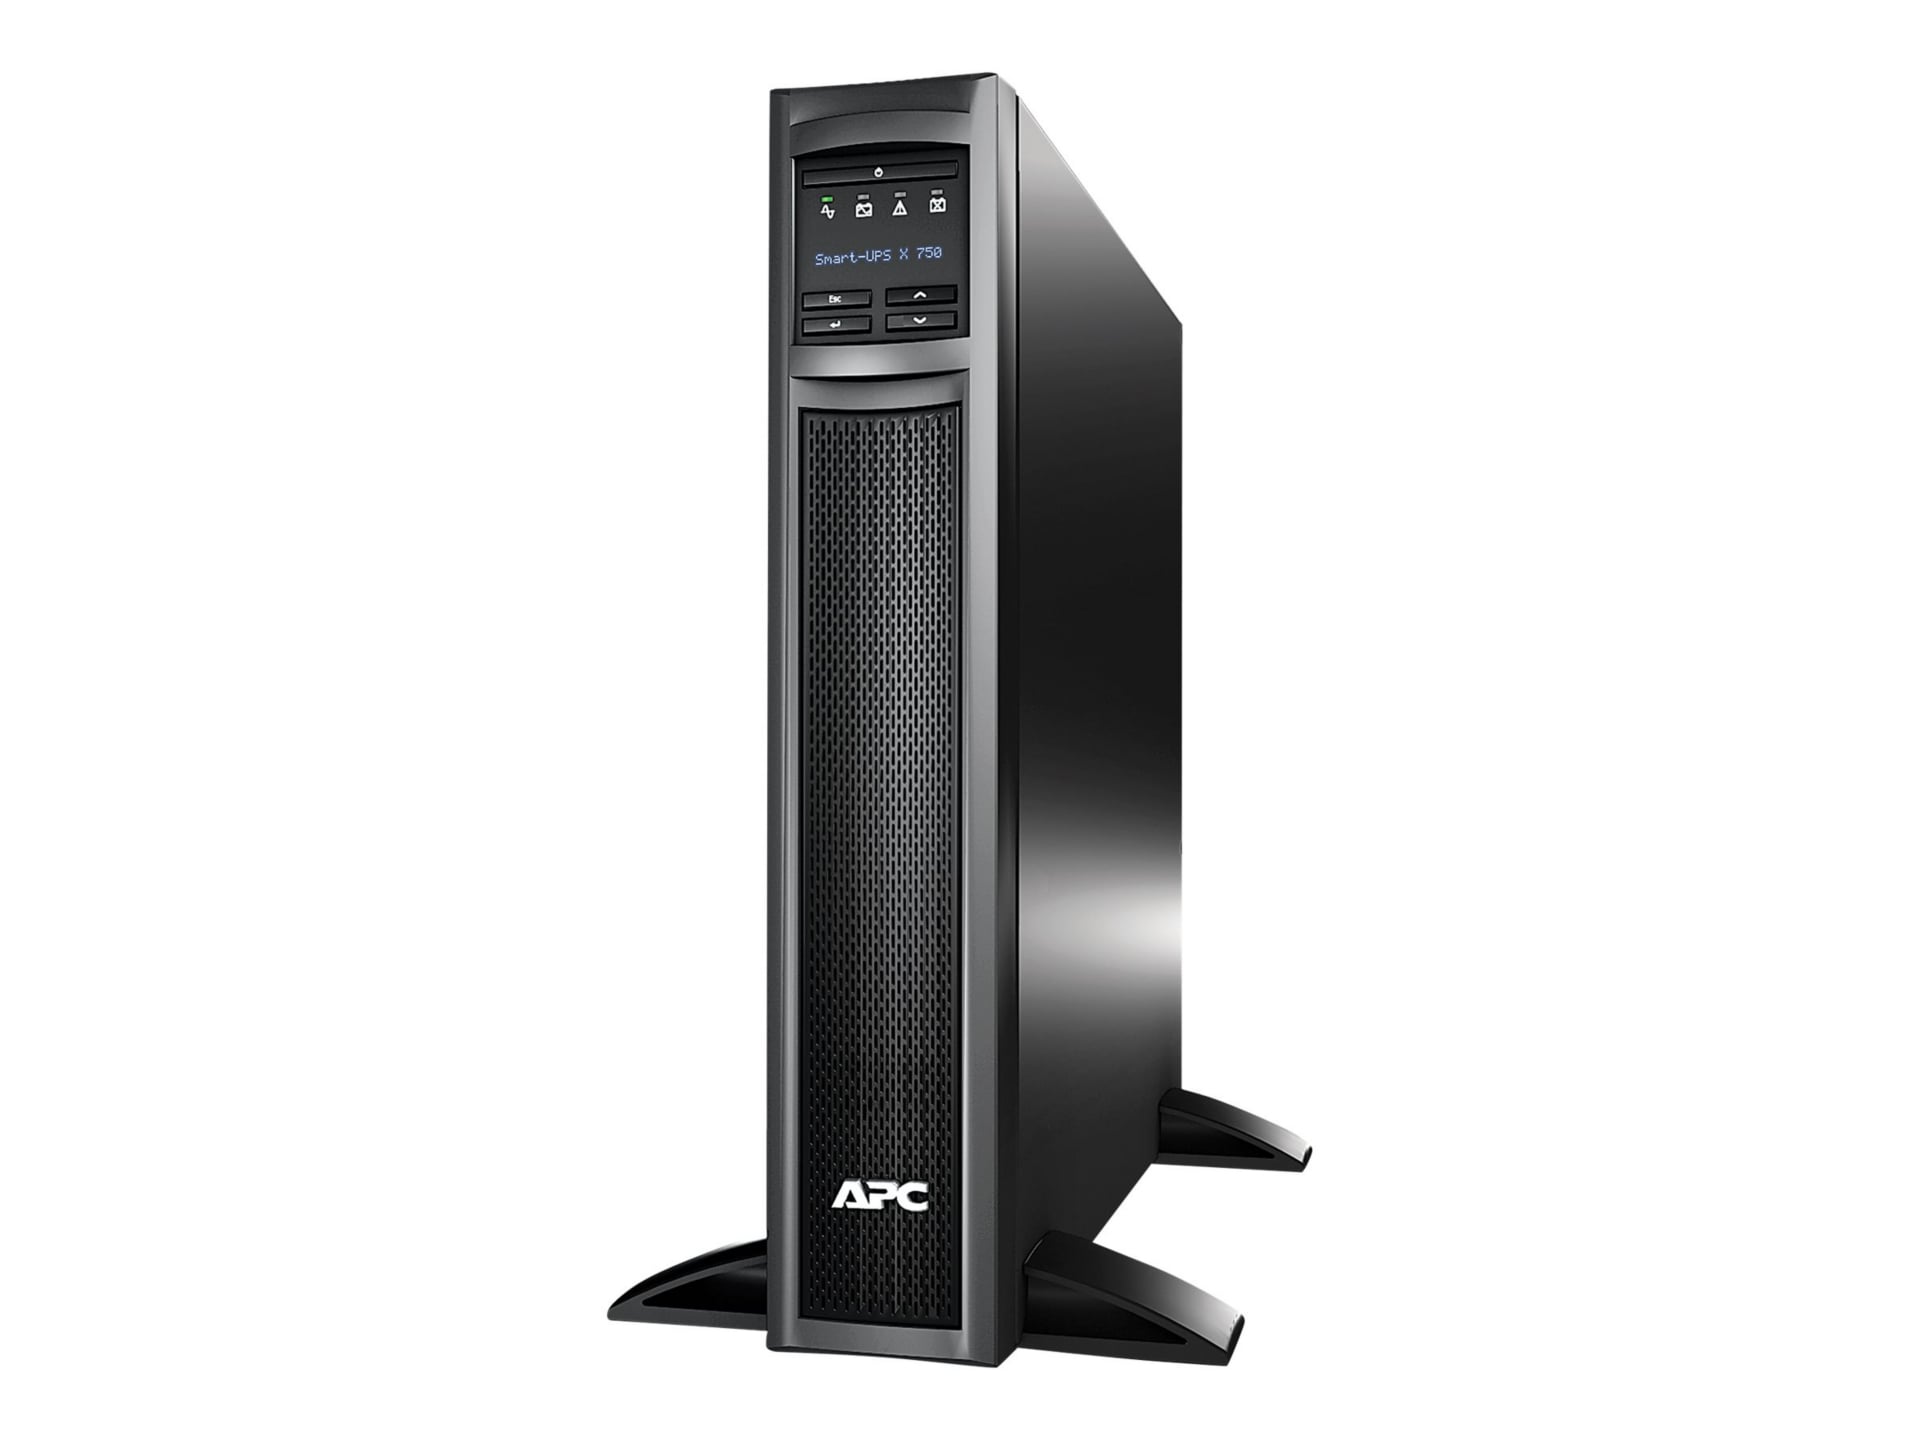 APC Smart-UPS X 750VA Tower/Rack 120V with Network Card- Not sold in CO, VT